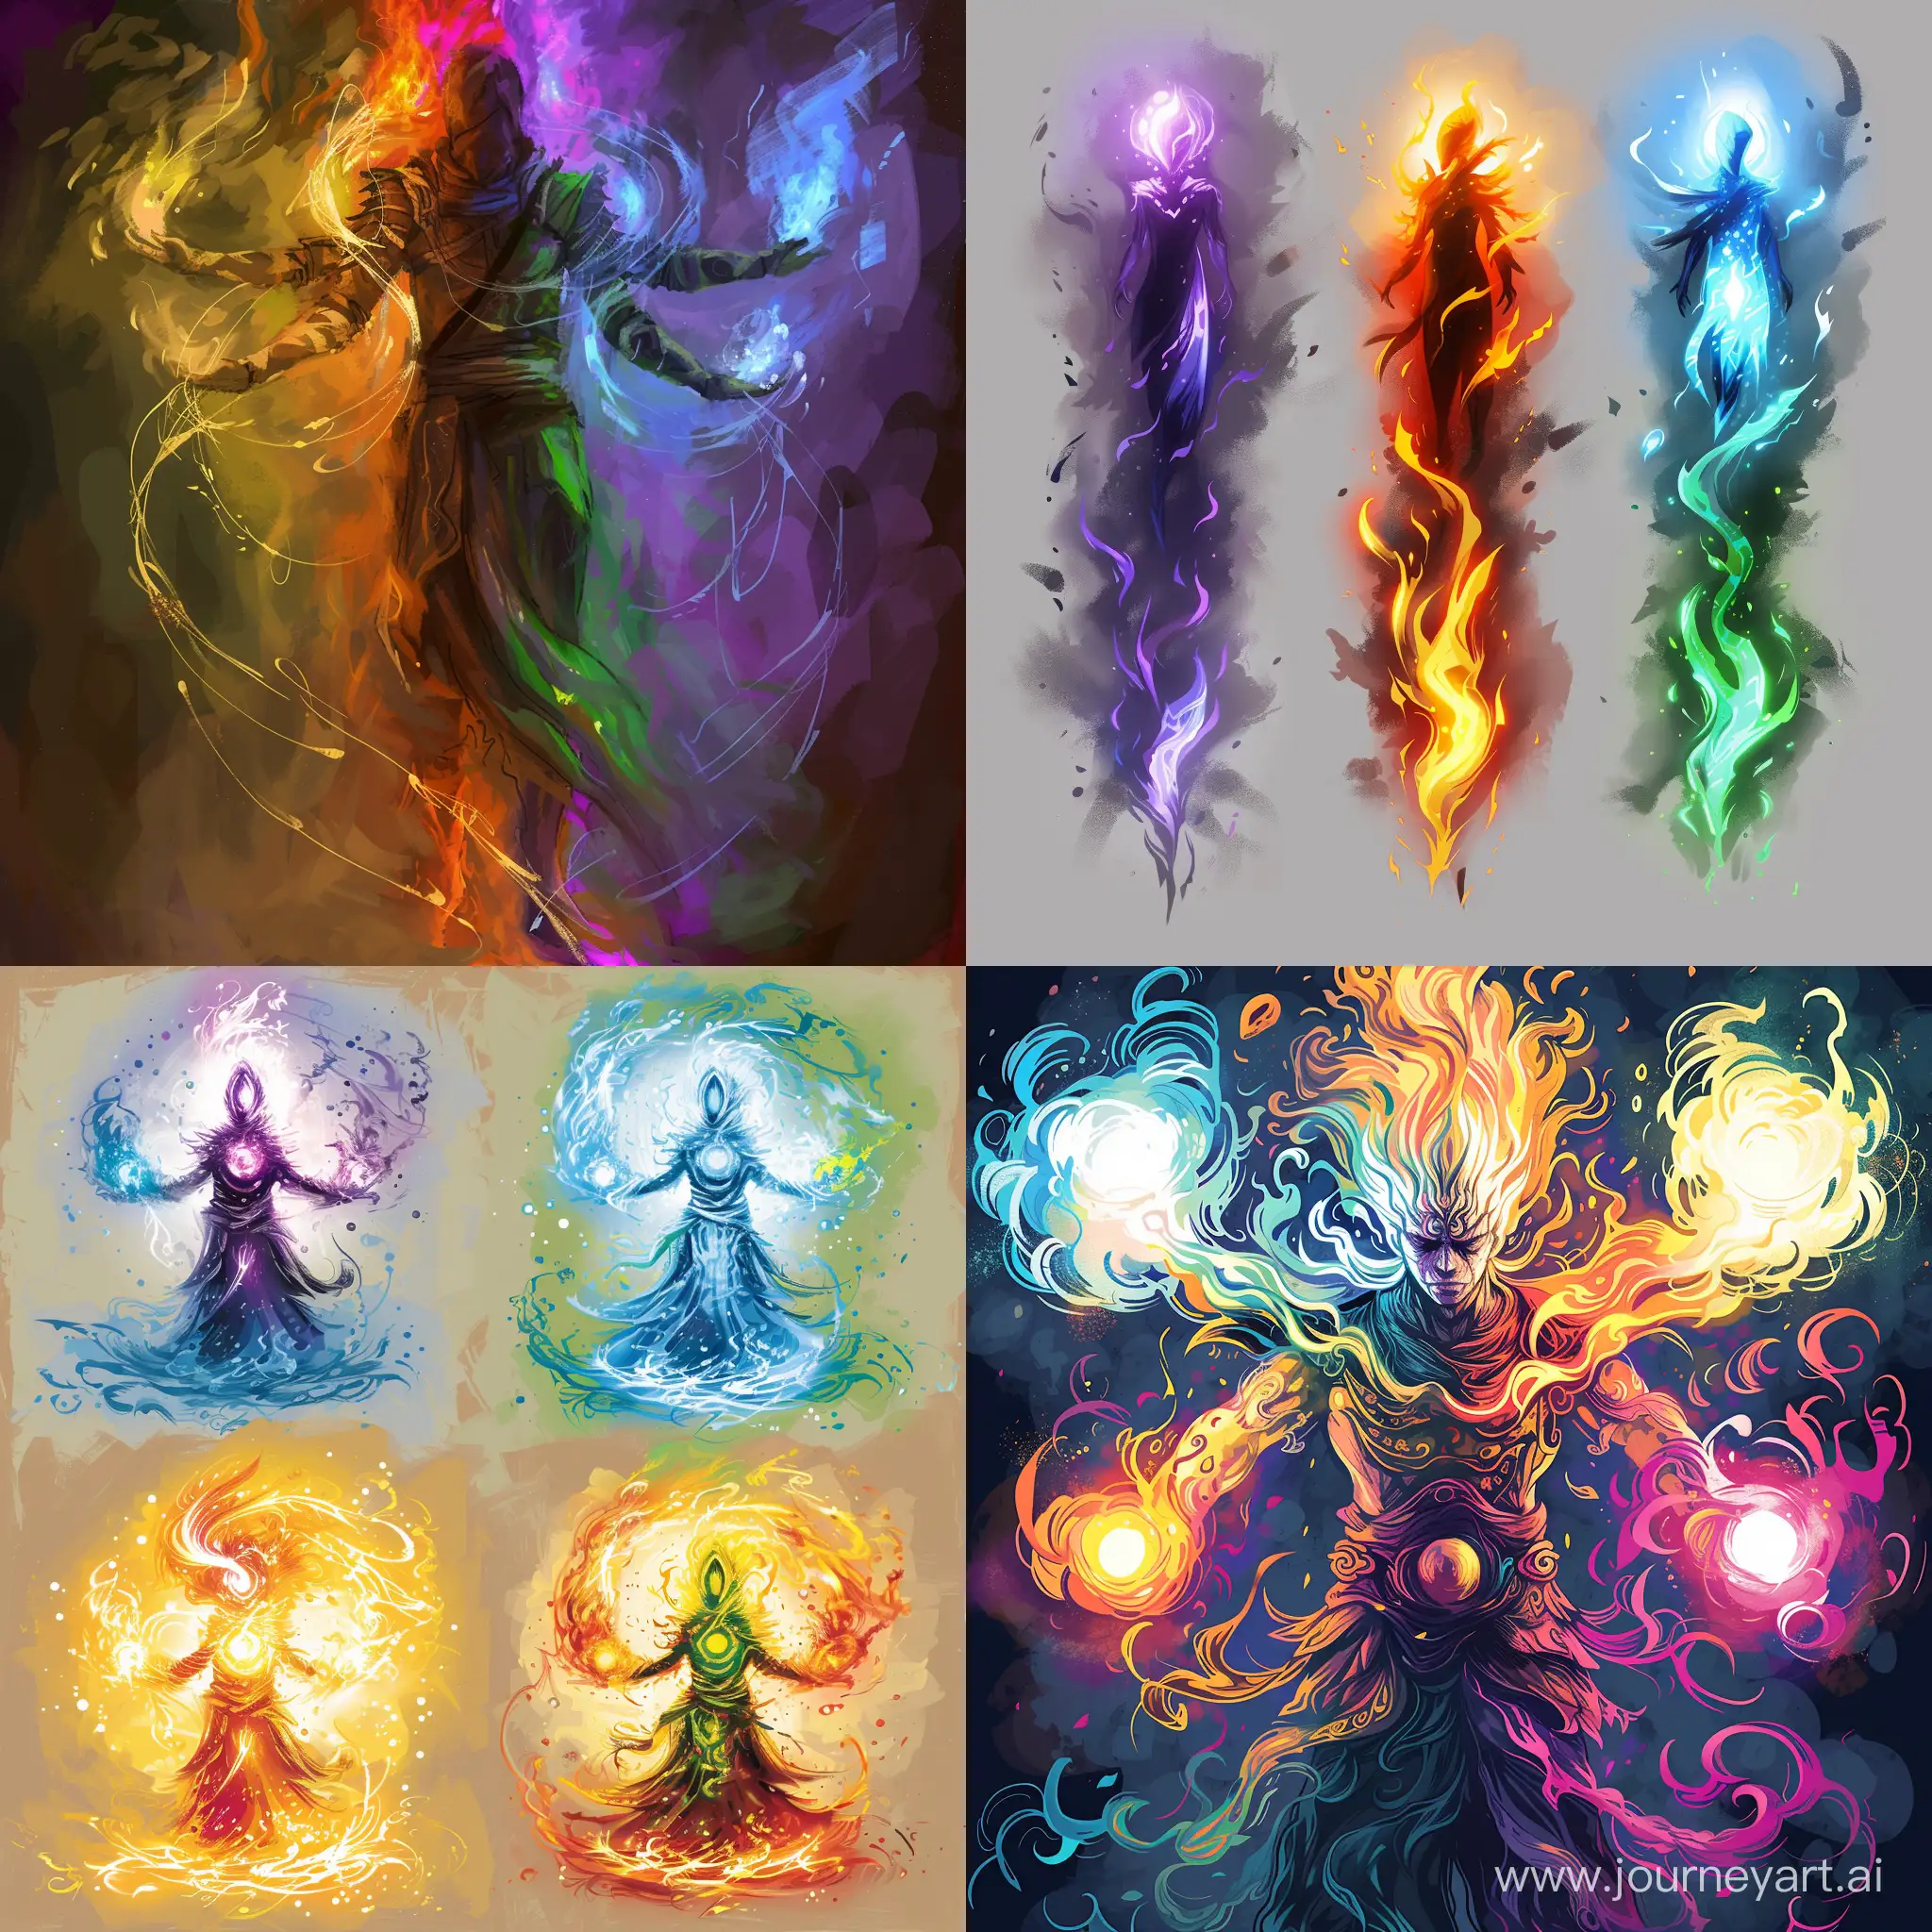 HandPainted-Protective-Auras-Collection-Vibrant-11-Art